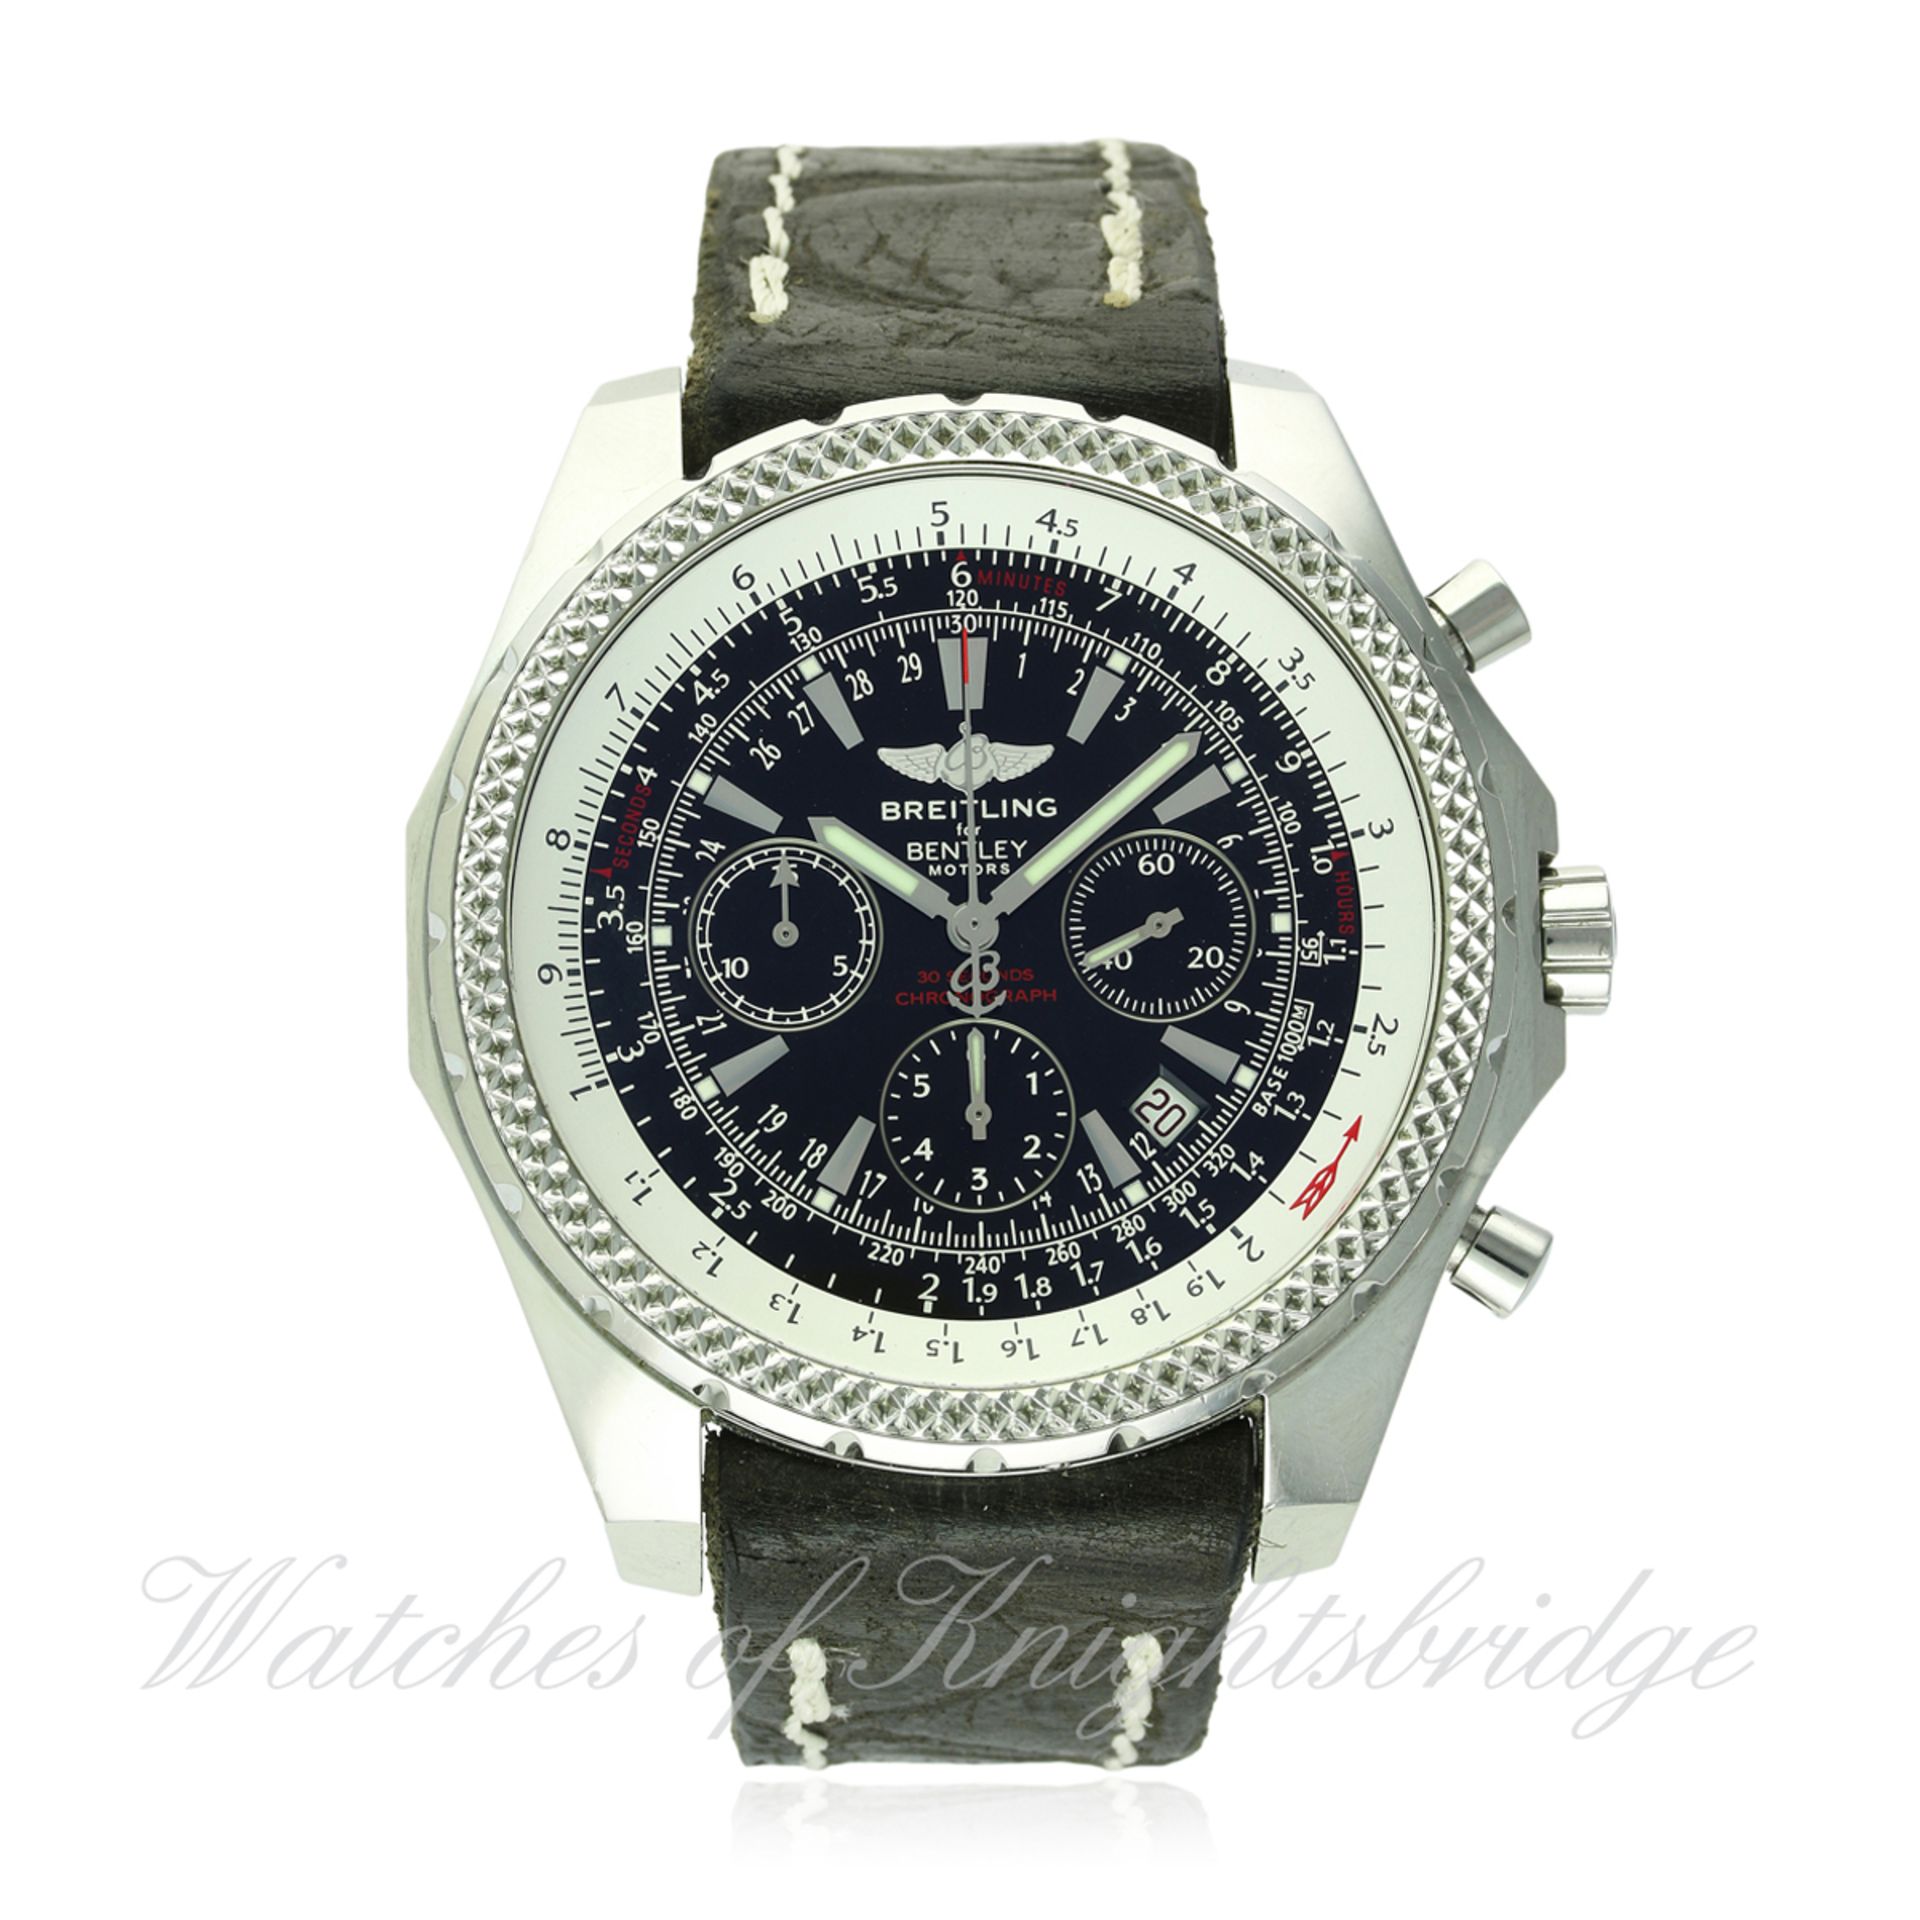 A GENTLEMAN'S STAINLESS STEEL BREITLING FOR BENTLEY MOTORS SPECIAL EDITION CHRONOGRAPH WRIST WATCH